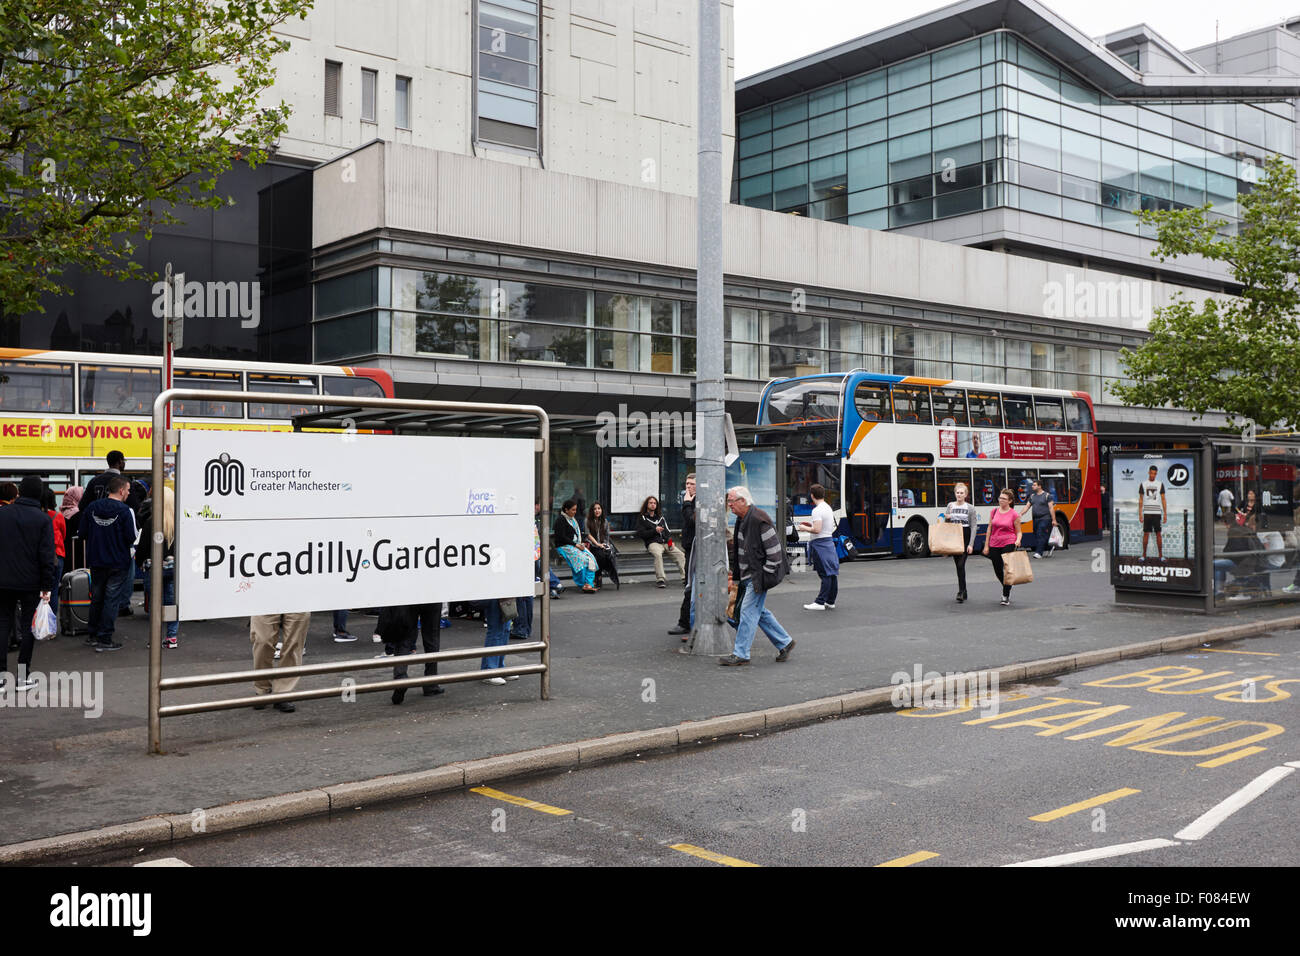 Piccadilly gardens bus station Manchester England UK Stock Photo